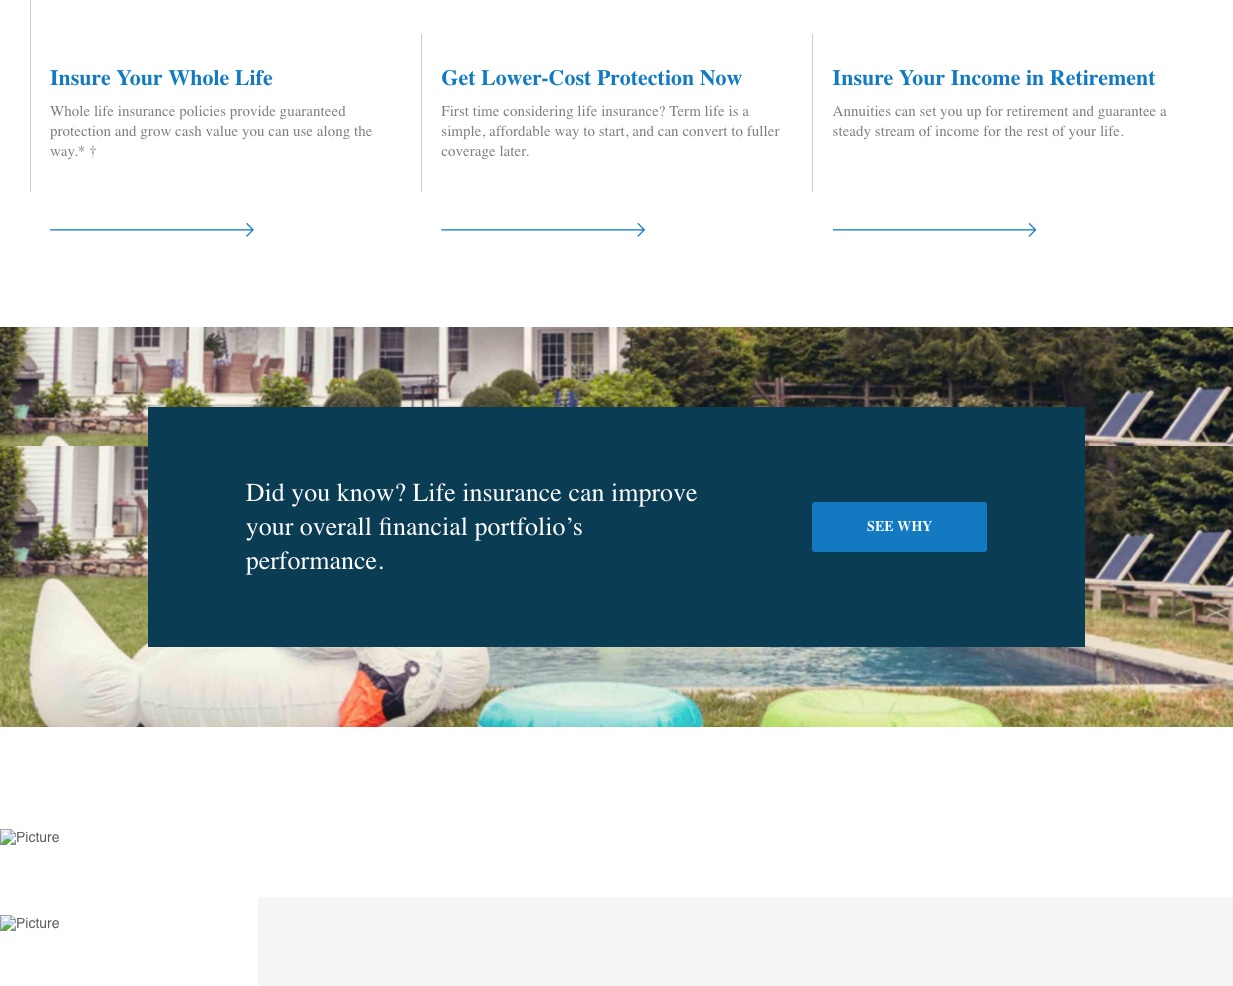 screencapture-web-archive-org-web-20161029223954-https-www-newyorklife-com-products-insure-2019-07-17-18_06_32.png